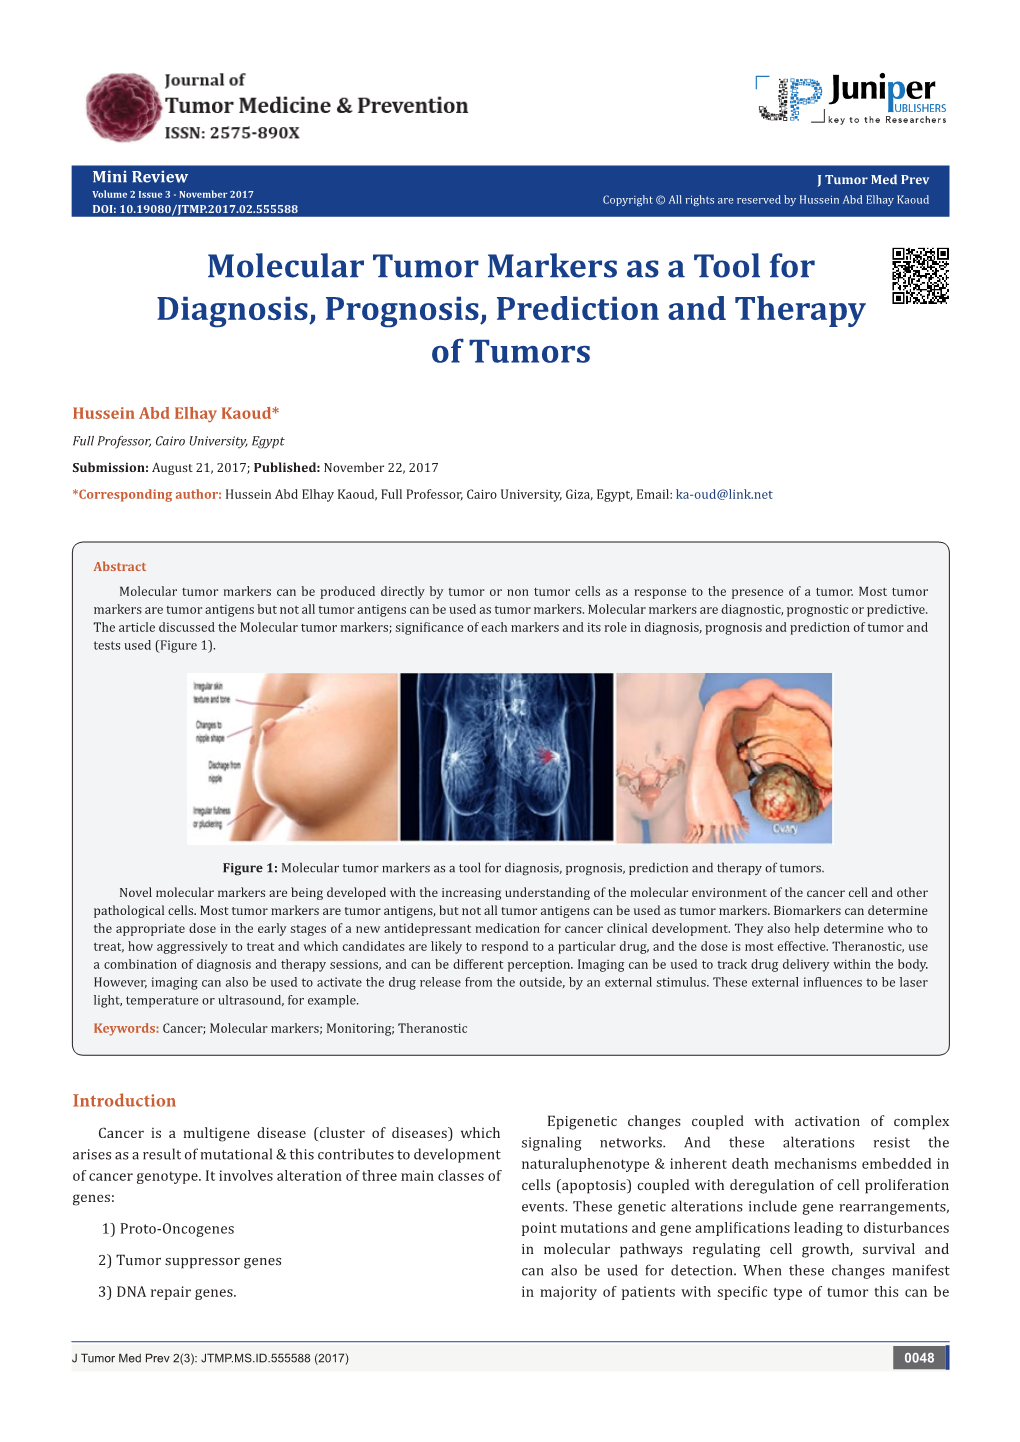 Molecular Tumor Markers As a Tool for Diagnosis, Prognosis, Prediction and Therapy of Tumors